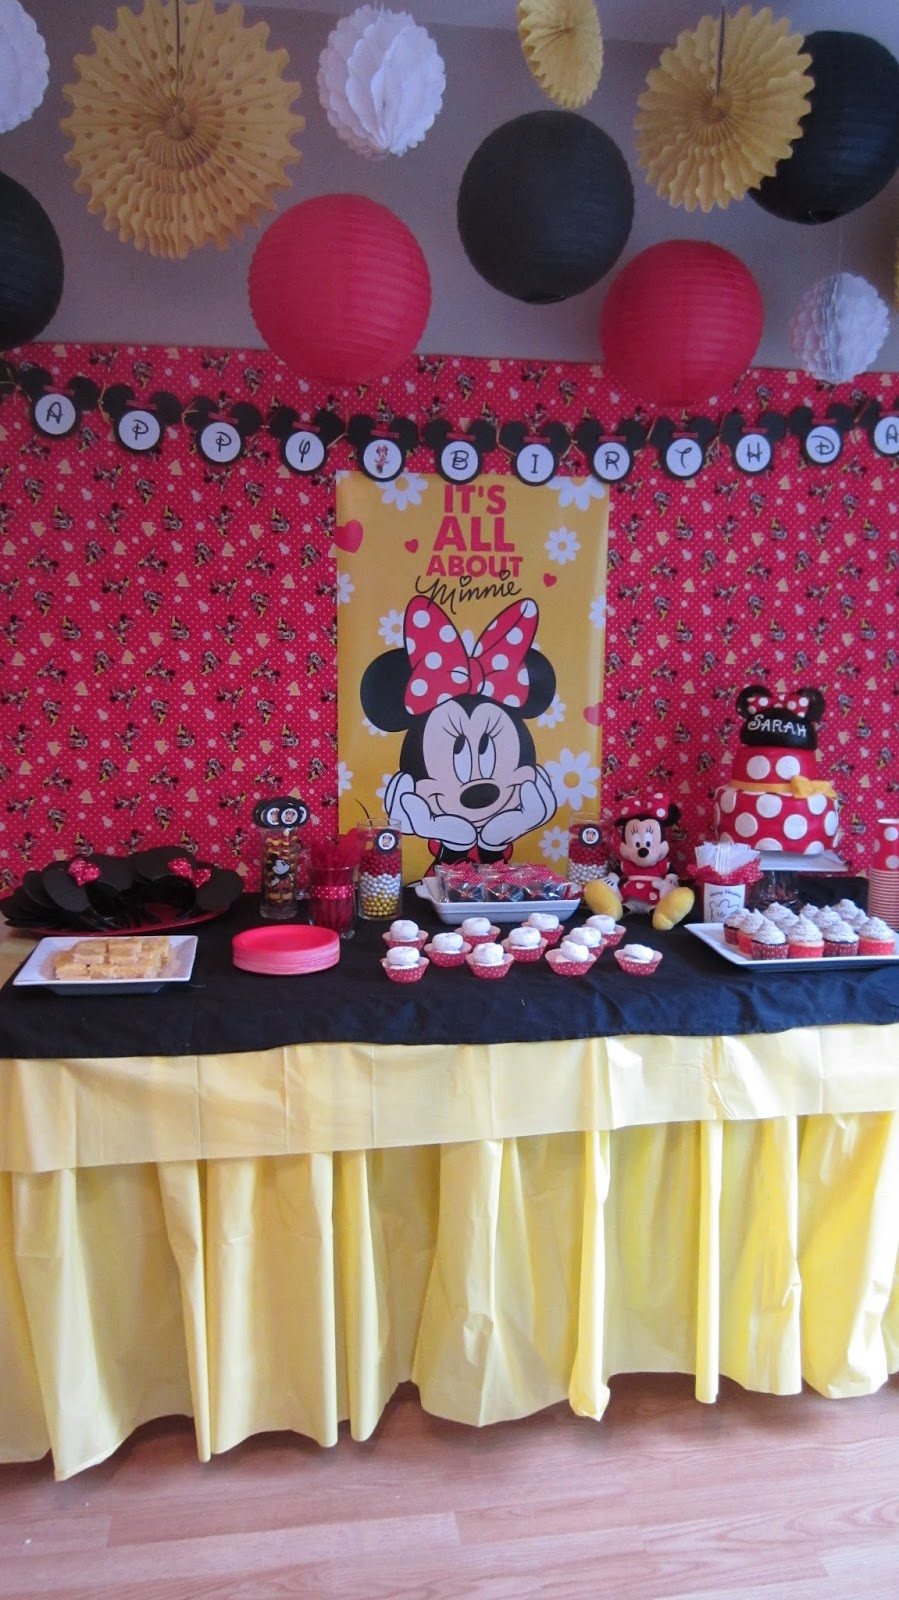 Minnie Mouse Birthday Decorations
 Party at the Beech Sarah s Minnie Mouse Birthday Party